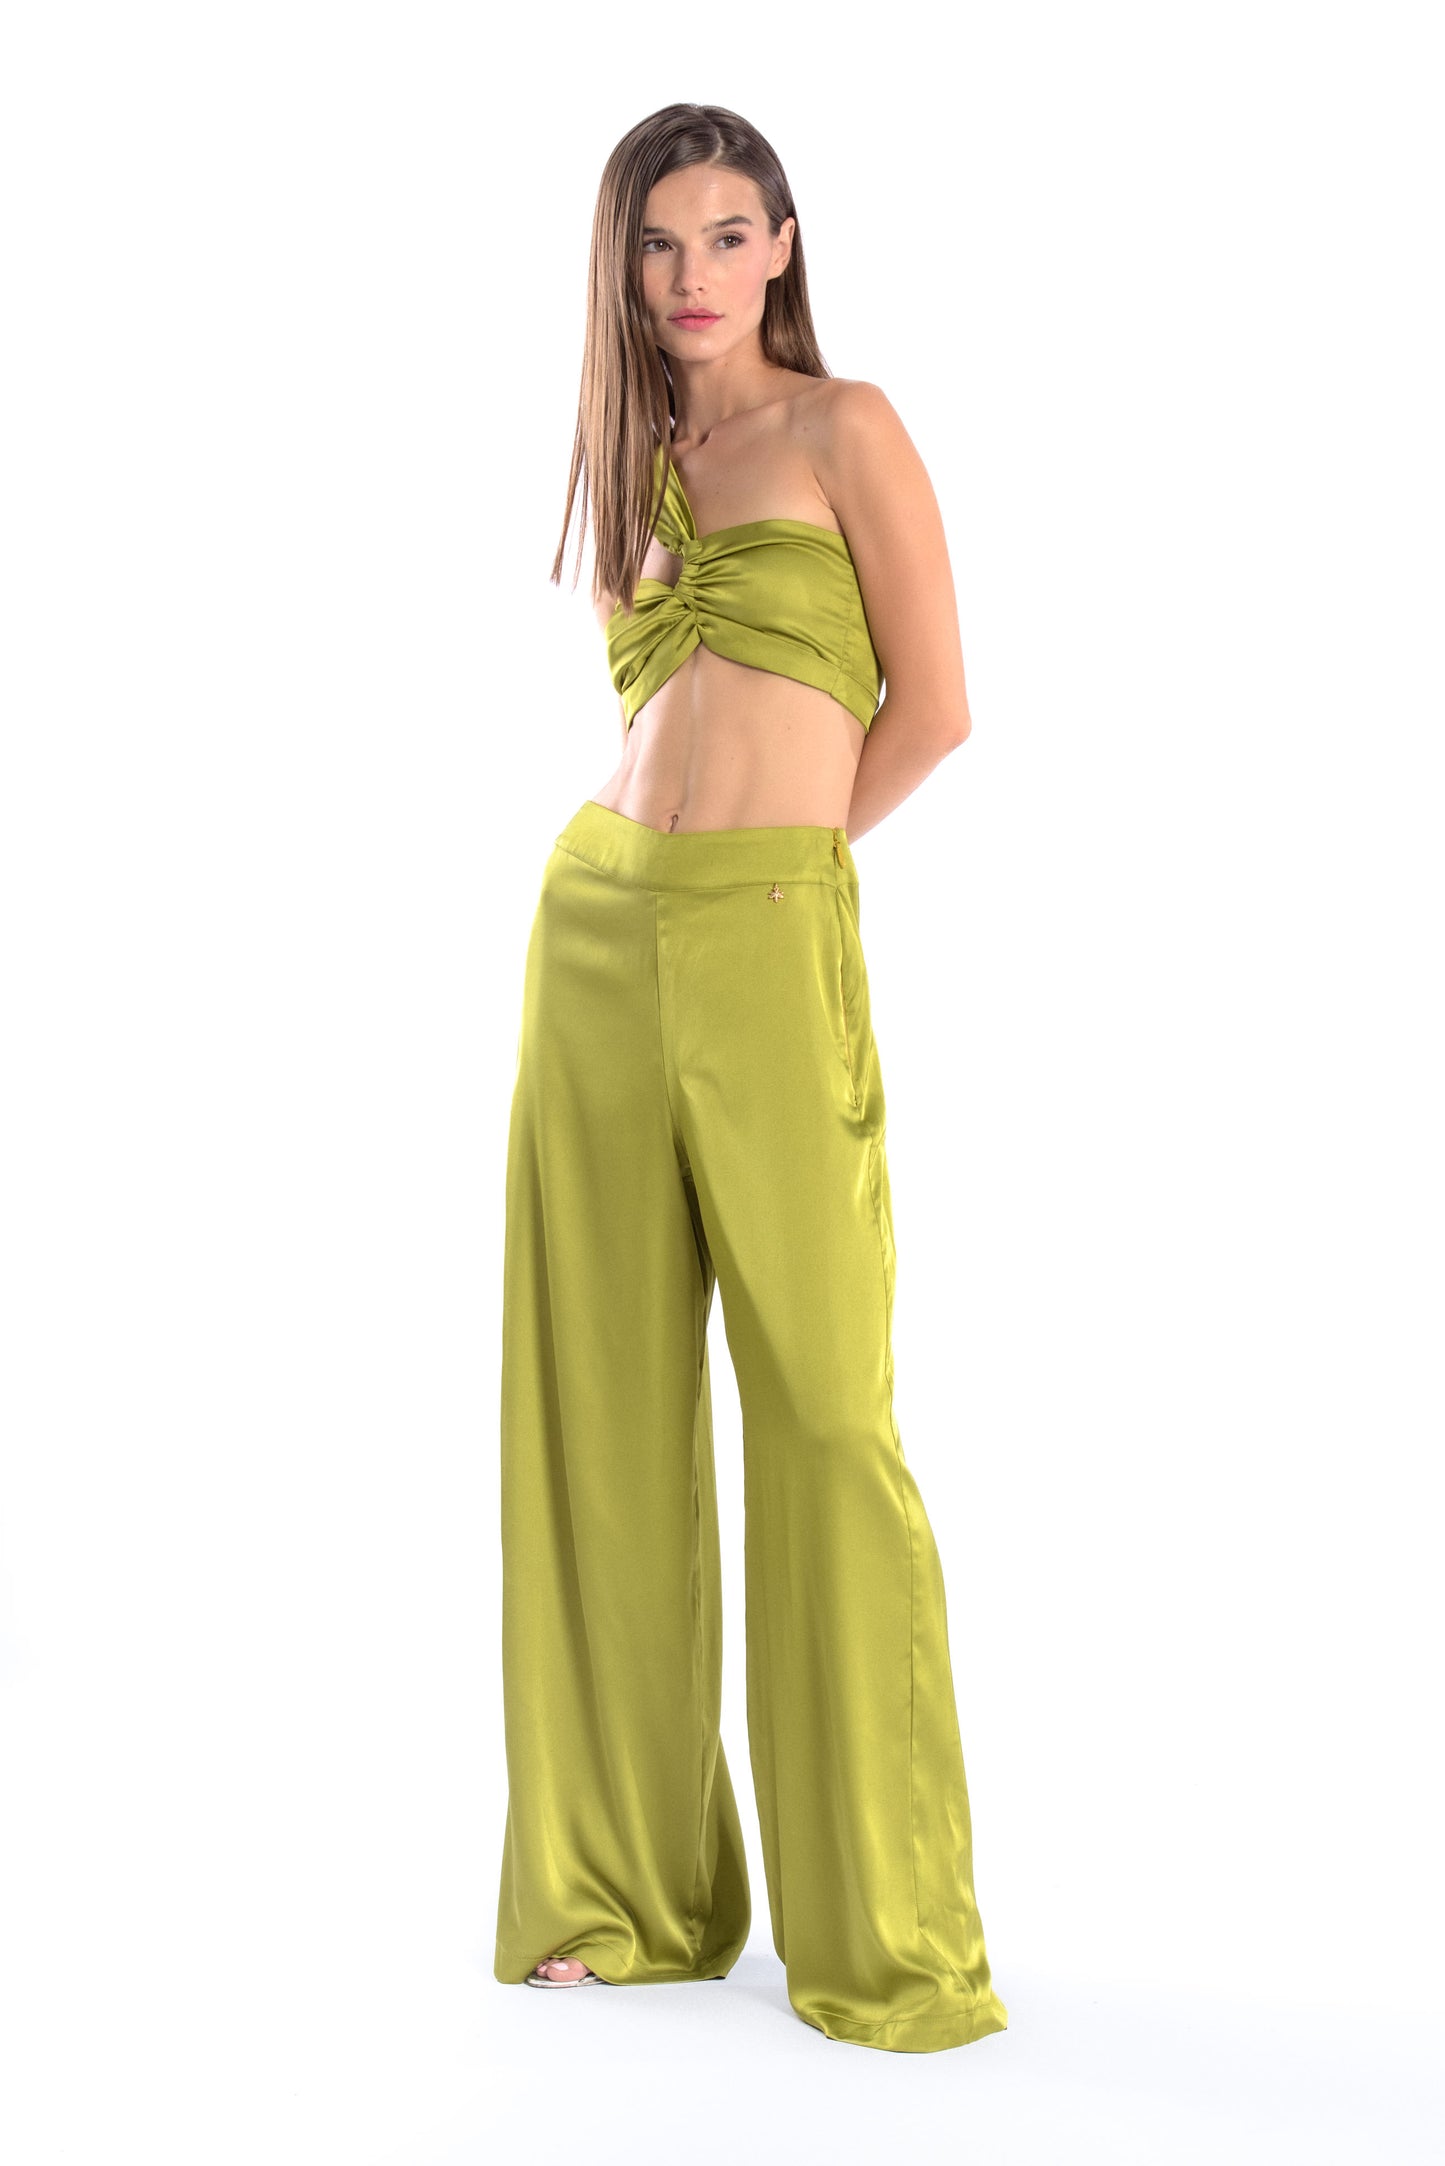 silk pants,firefly charm,side zipper,vibrant silk collection,mix and match,edgy style,luxury fashion,comfort and style,quality design,durable, olive green pants